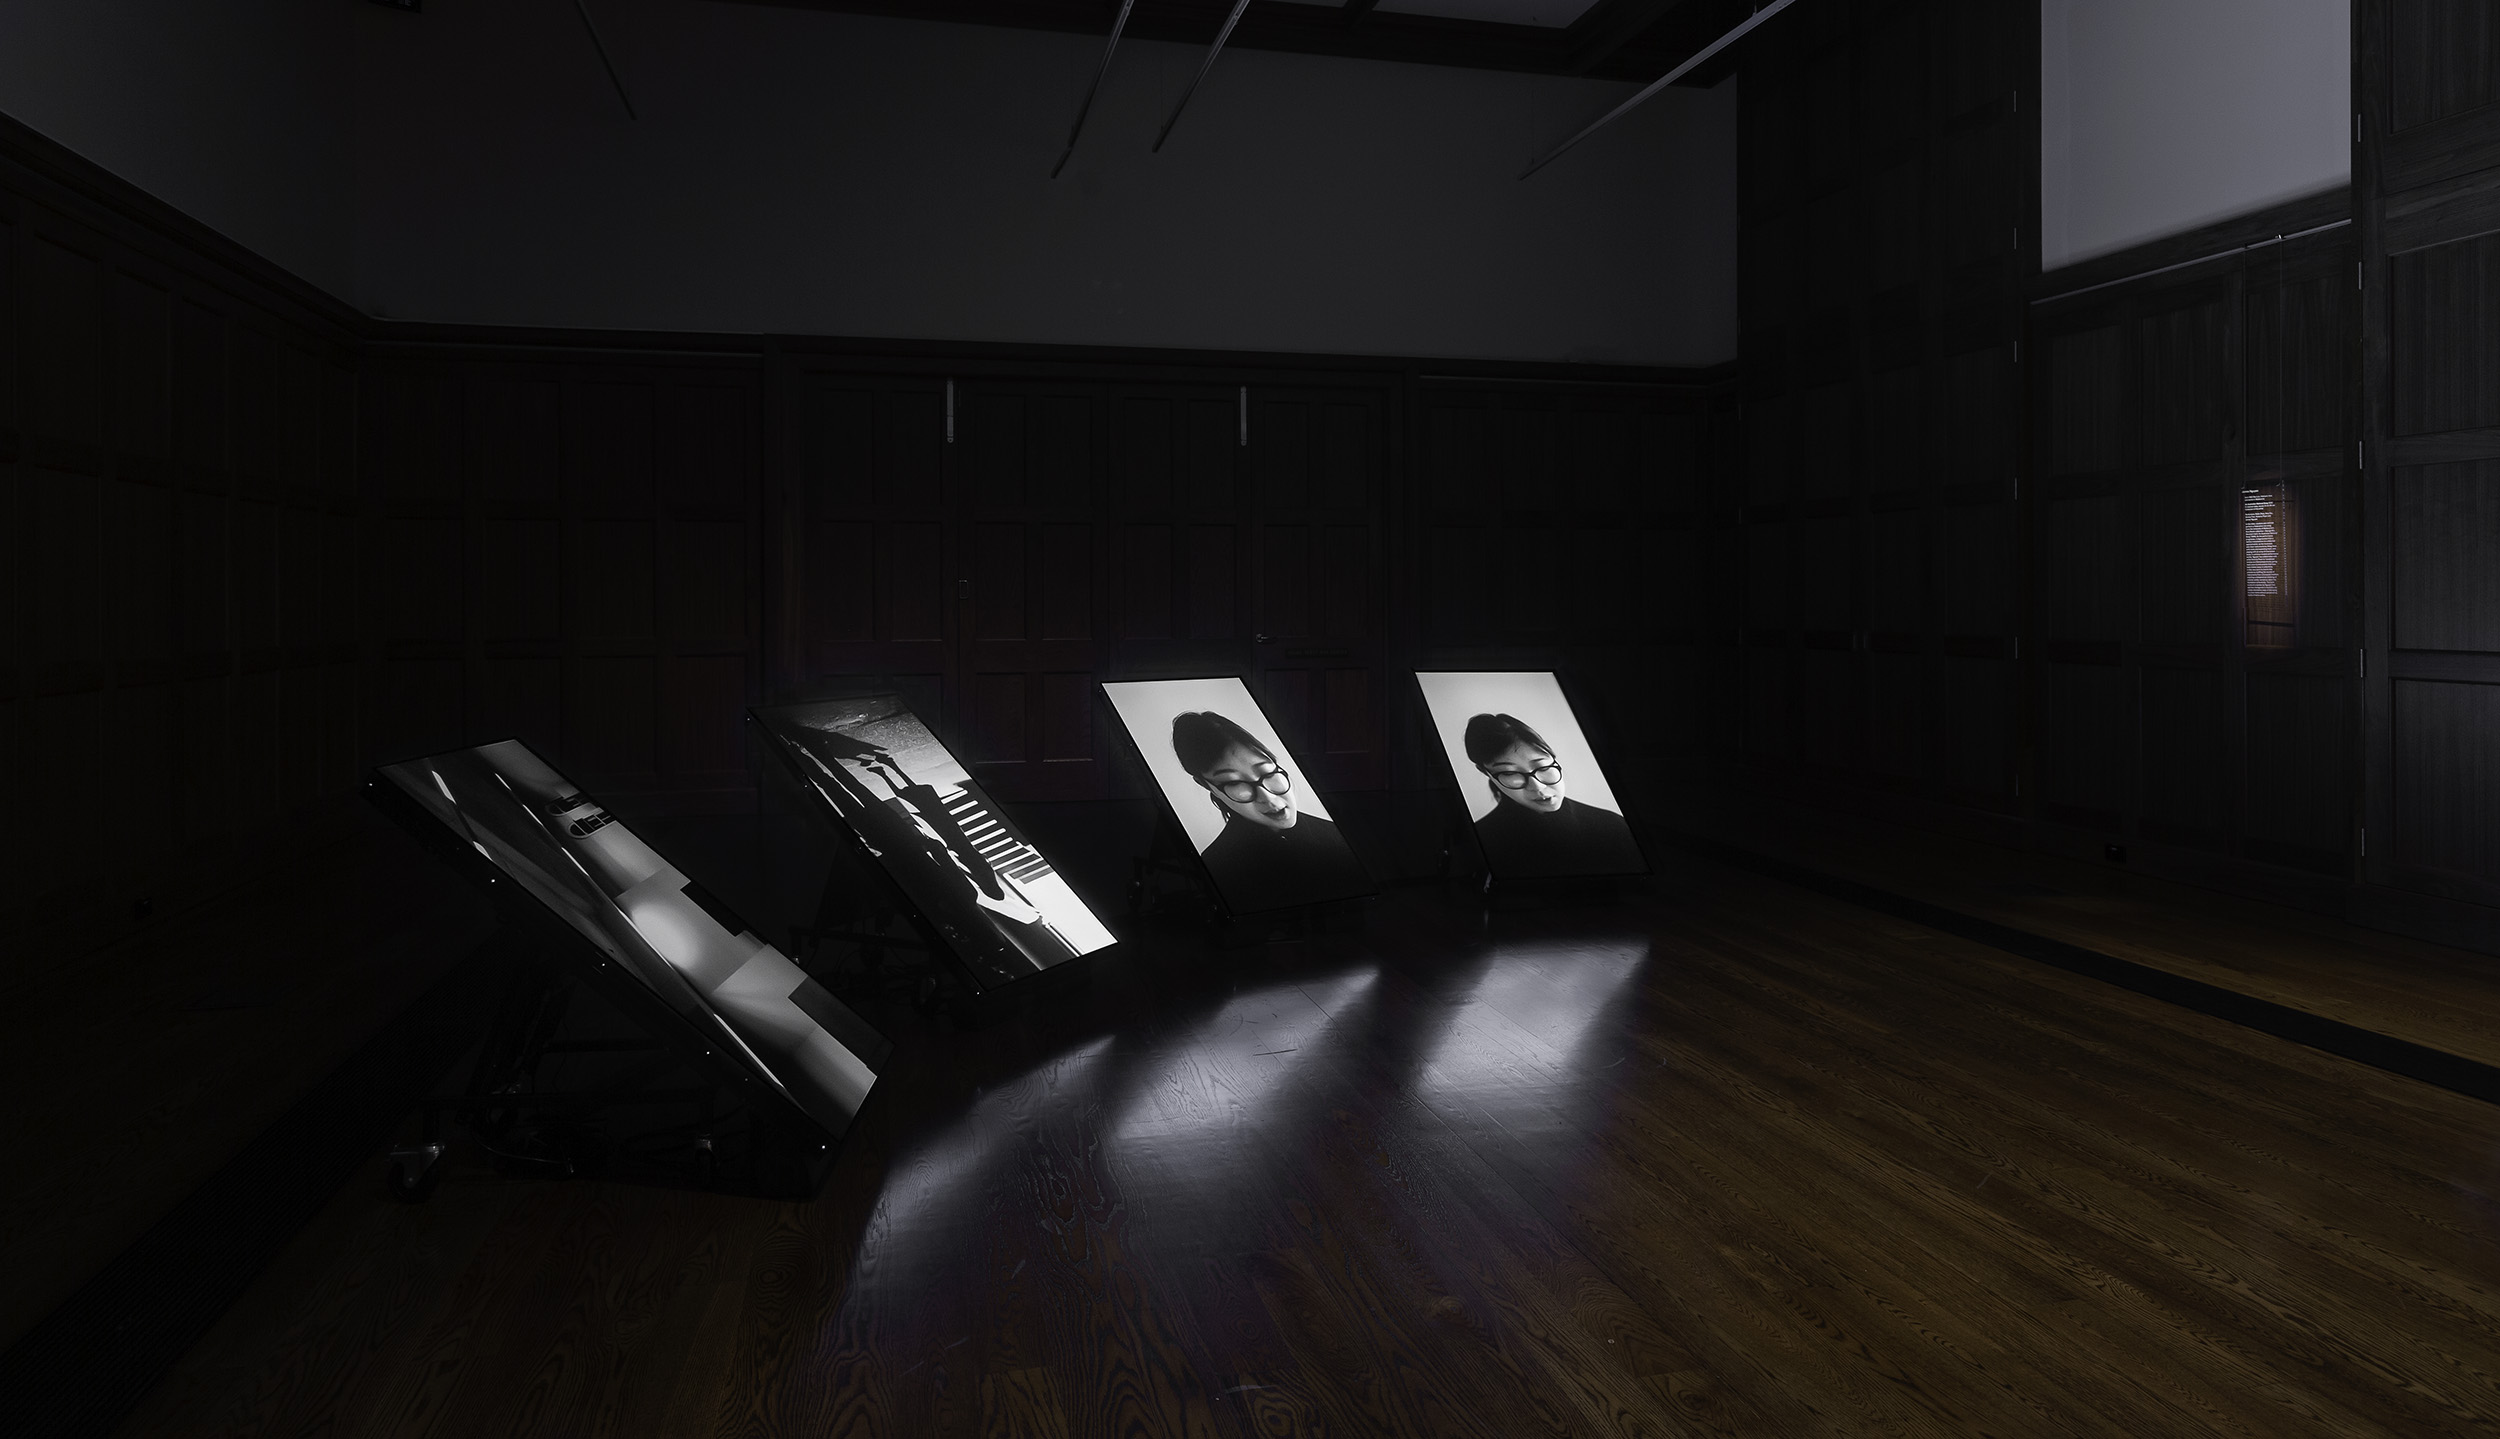 Installation view of James Nguyen, An Australian National Song 2022, 4-channel video, 8:55 min. On display in Collective Unease at the Ian Potter Museum of Art, Old Quadrangle, University of Melbourne. Photo: Christian Capurro. Courtesy of the curators.